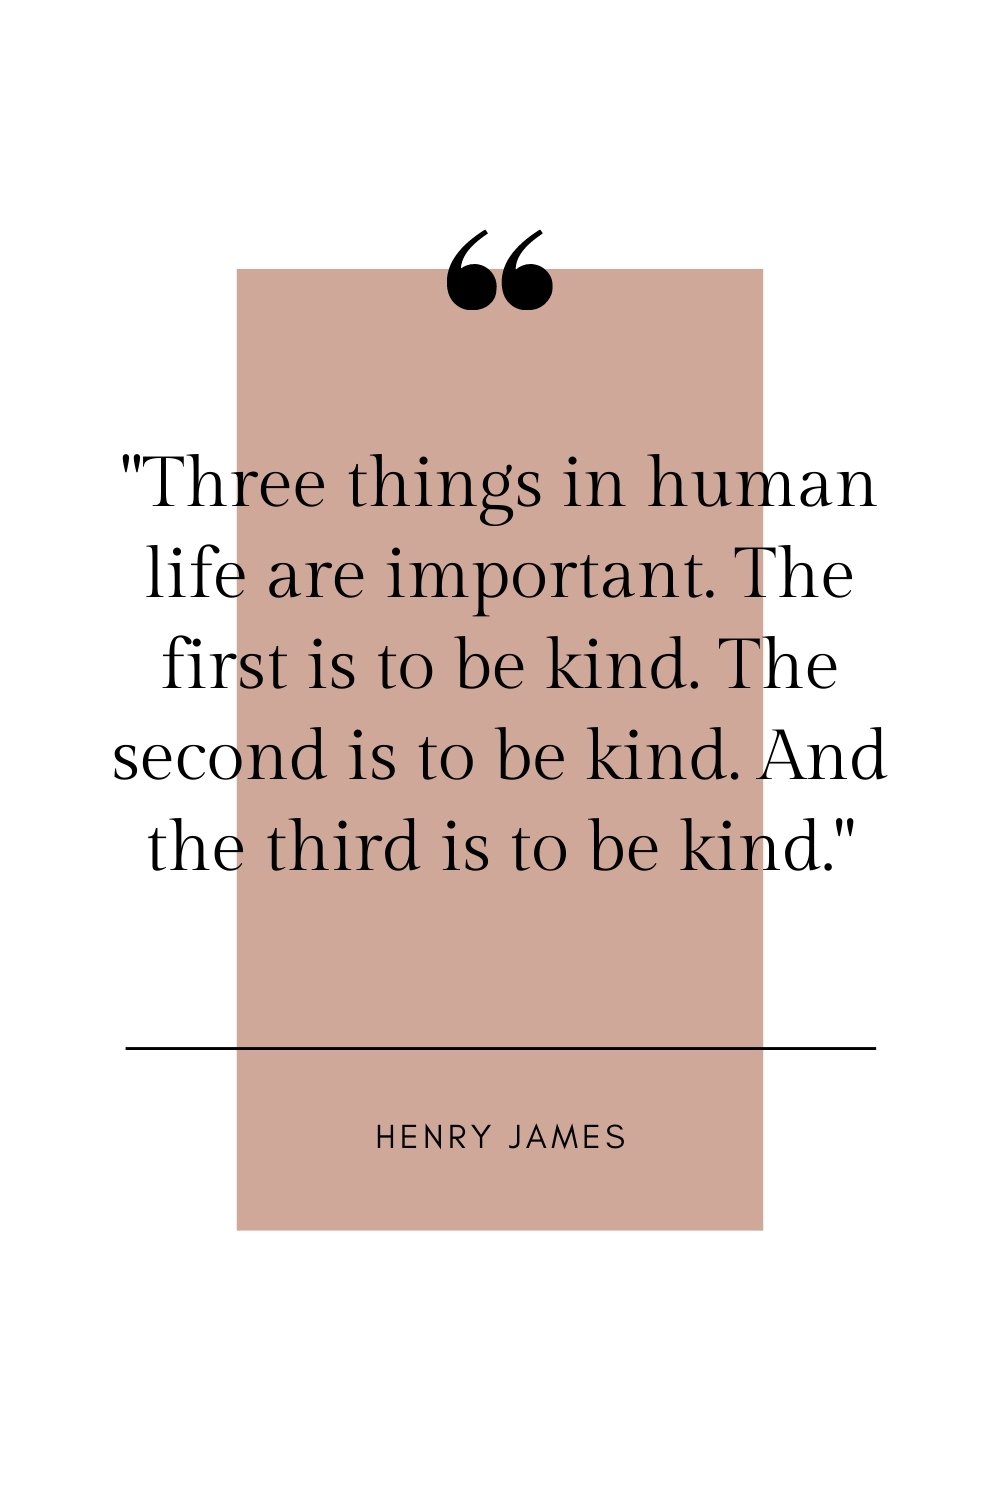 henry james quote